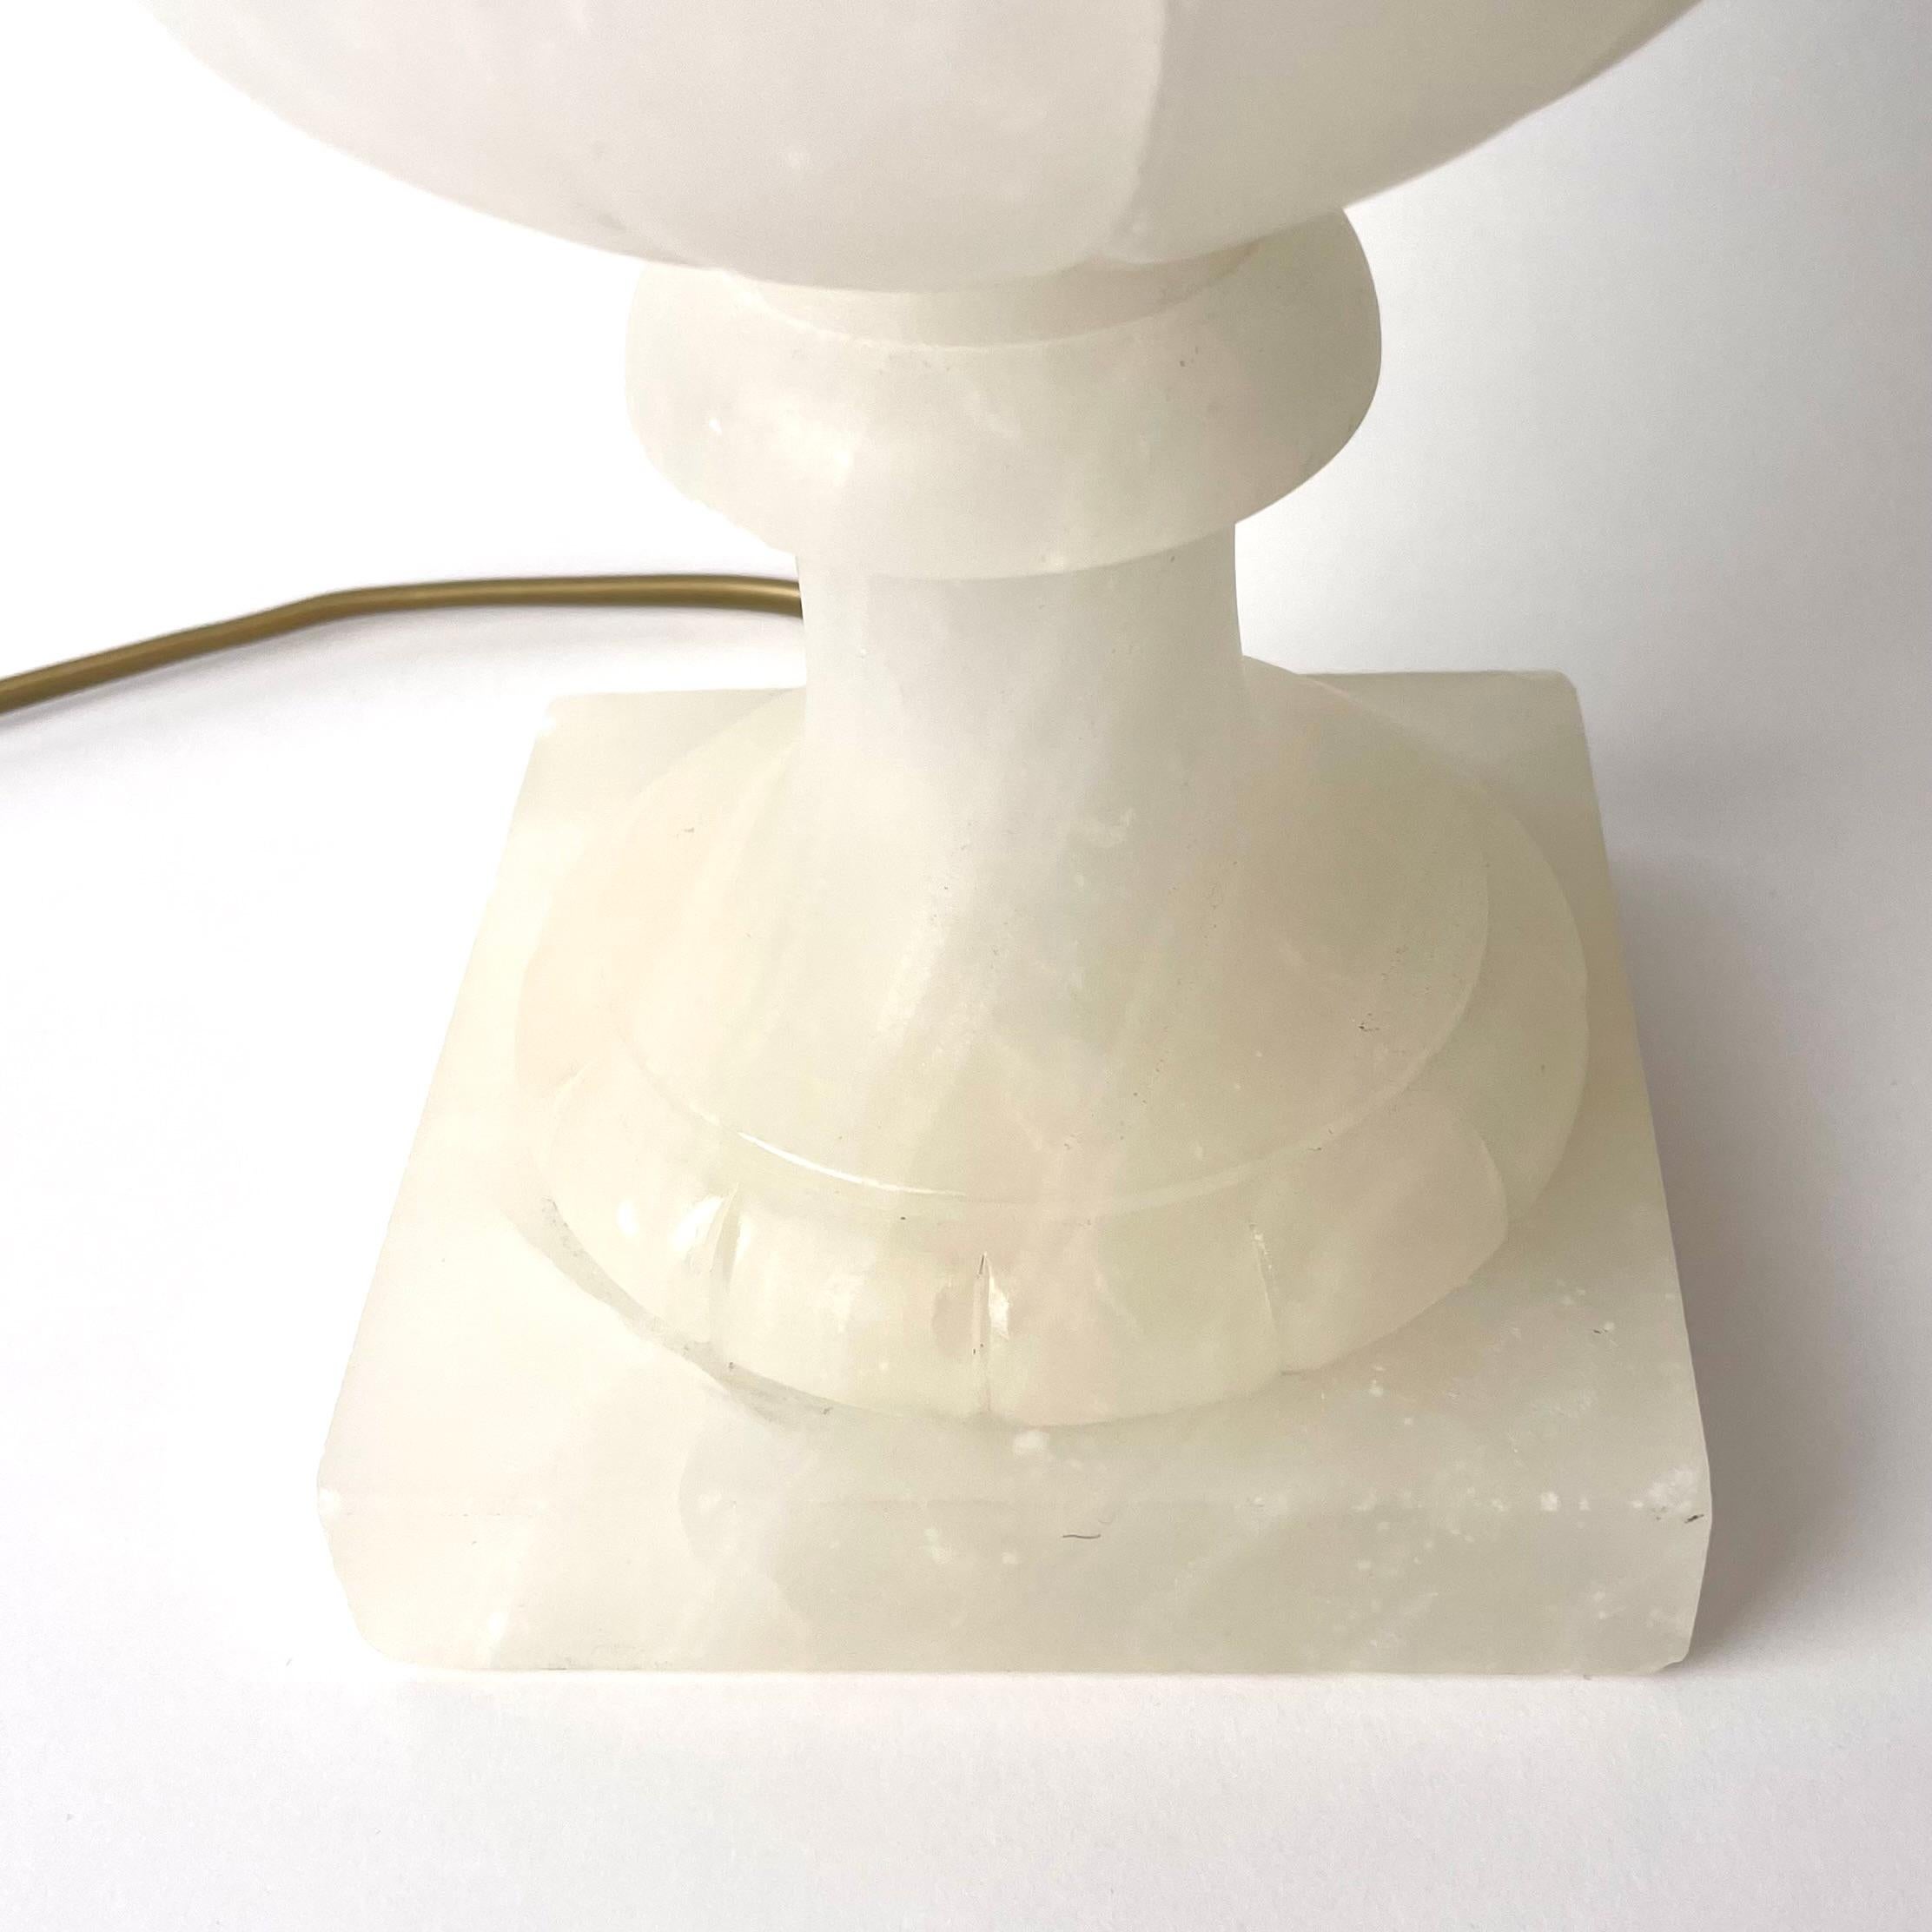 Elegant Alabaster Table Lamp in the Shape of a Classical Urn, Early 20th Century For Sale 2